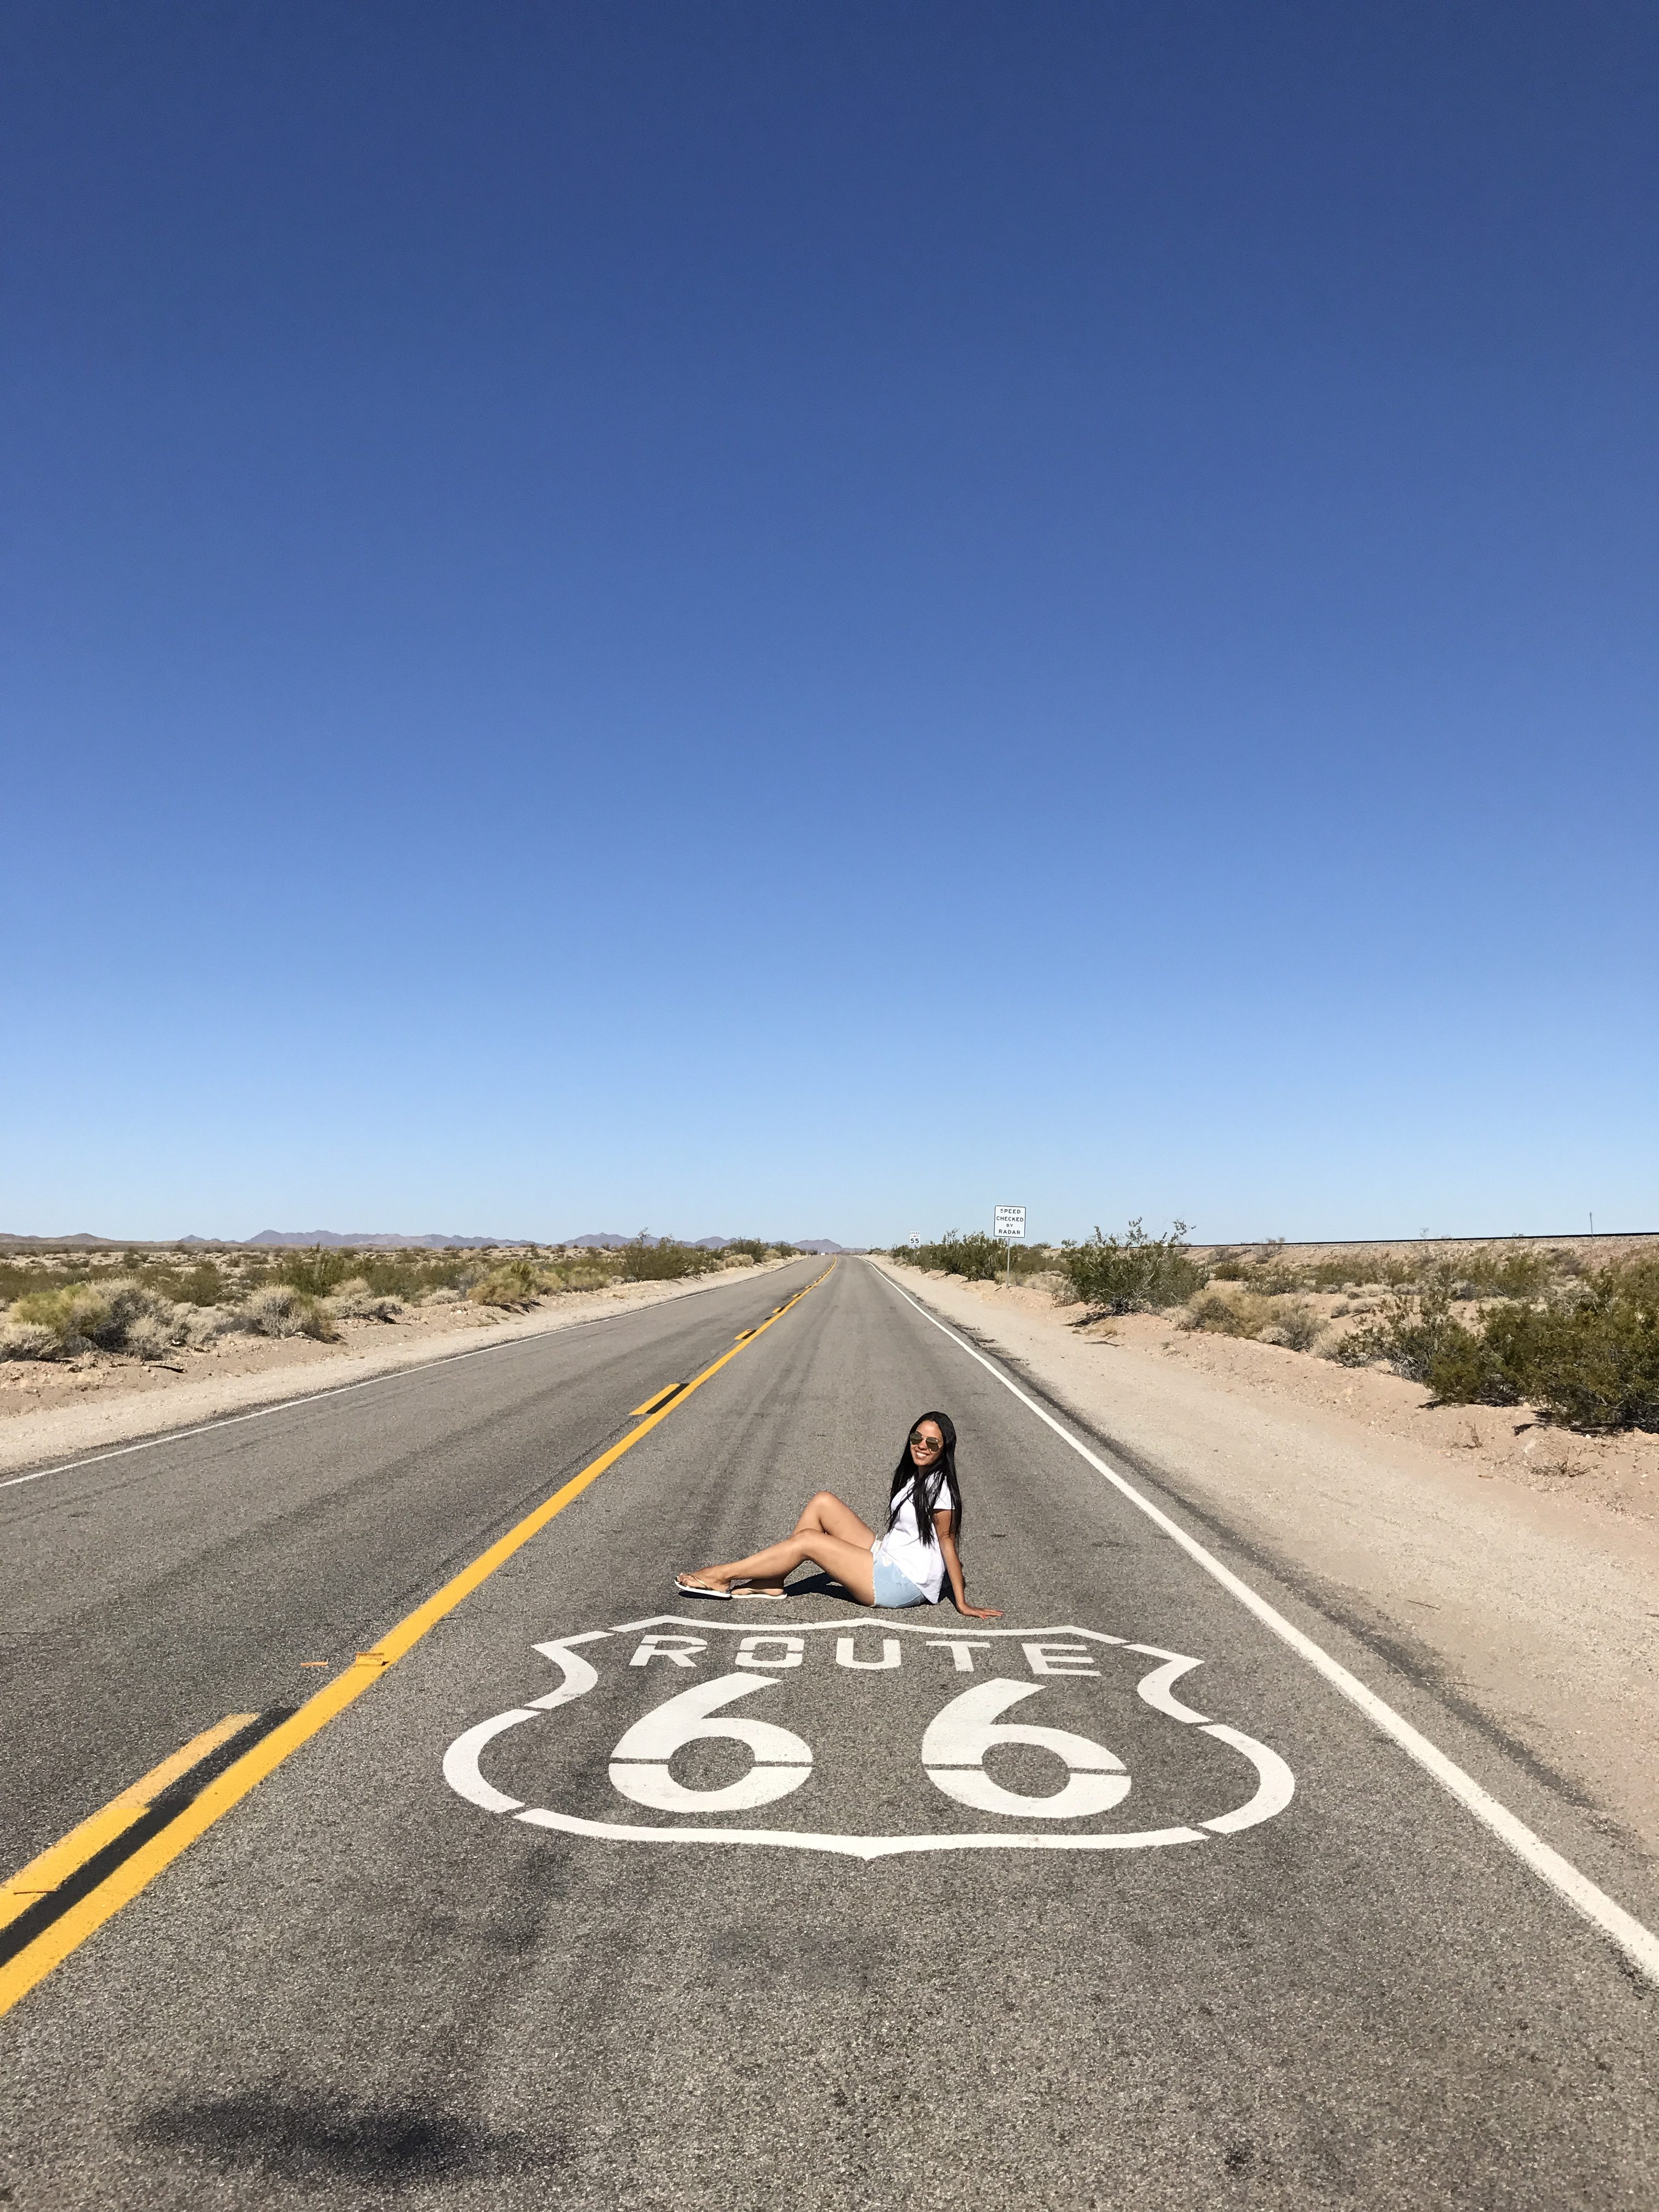 Mariana sat down in the middle of Route 66, a clear blue sky above her.